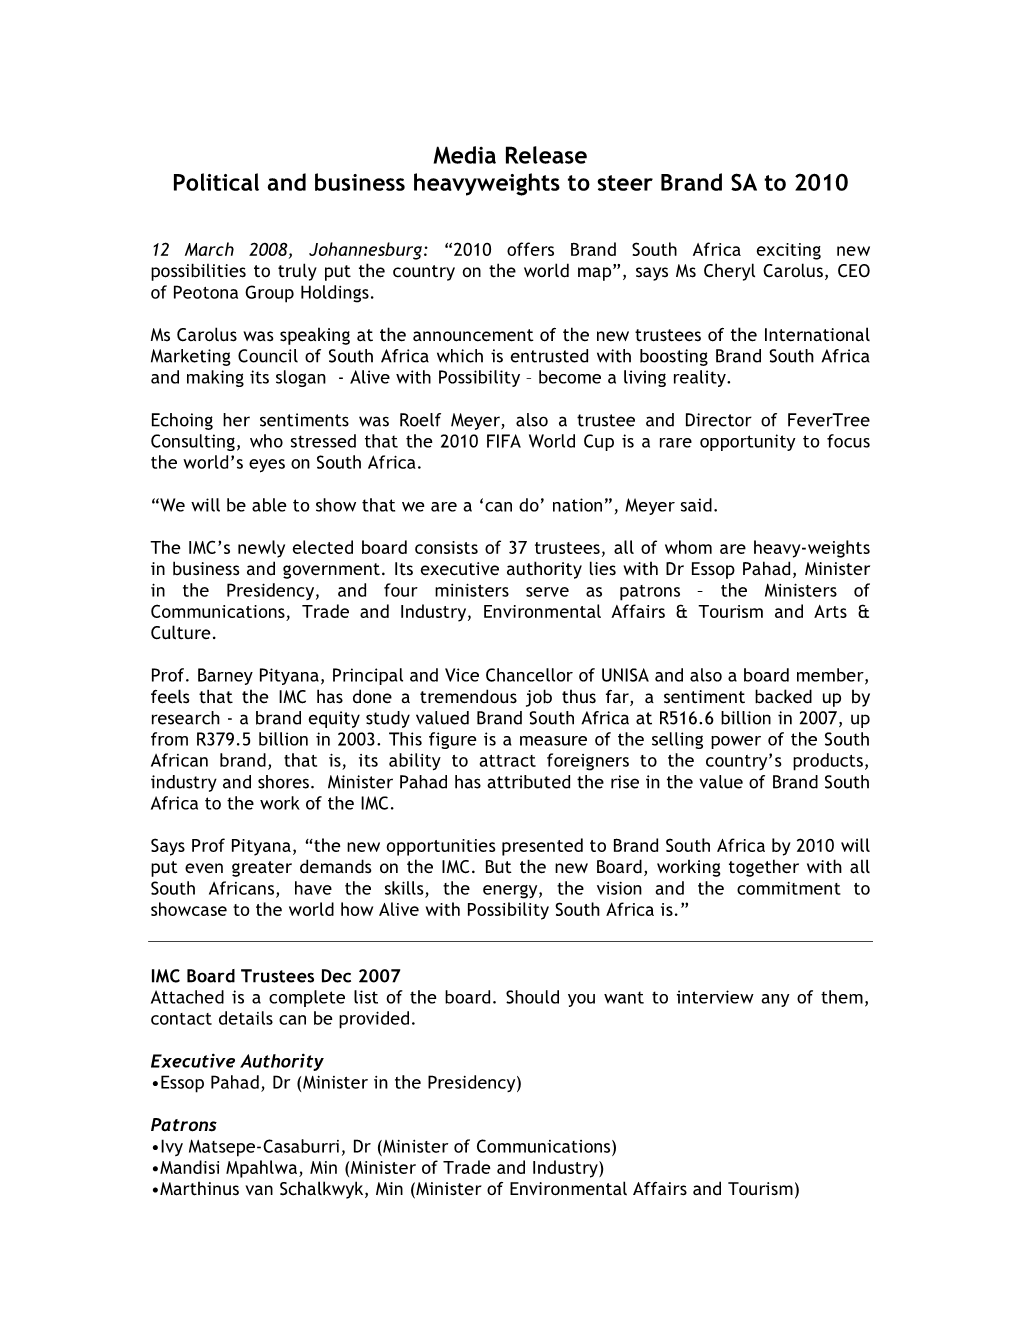 Media Release Political and Business Heavyweights to Steer Brand SA to 2010